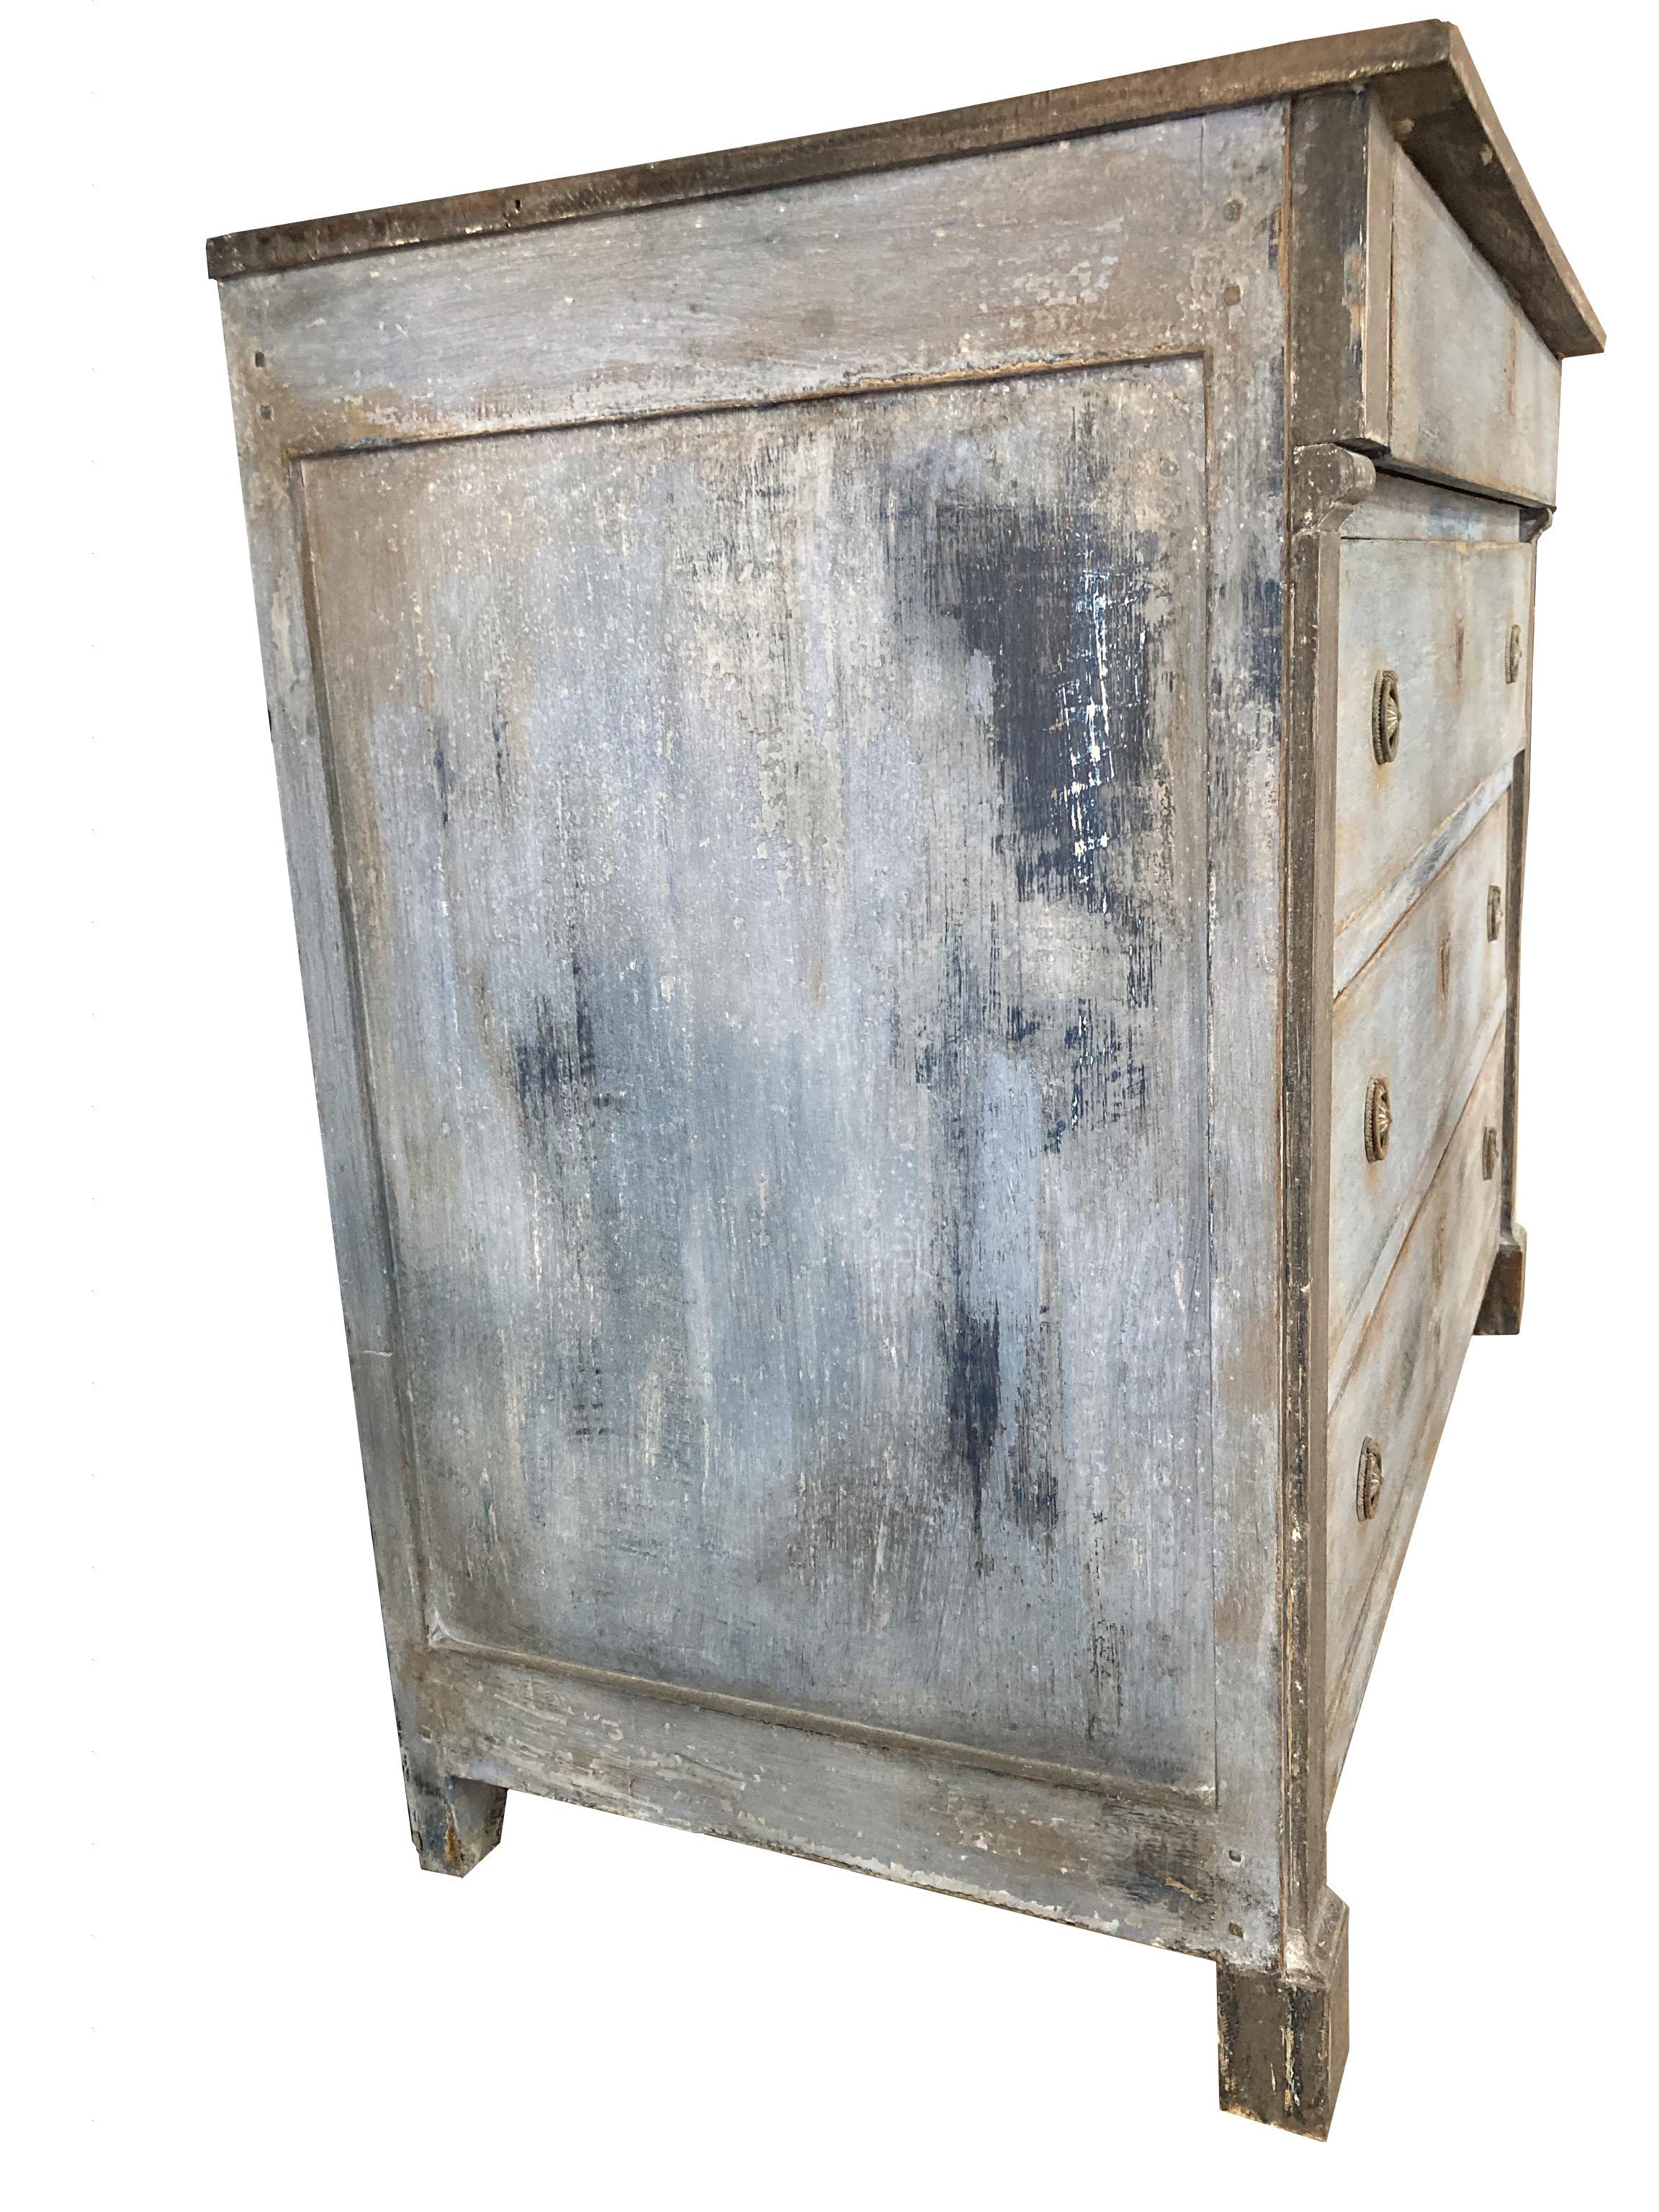 Large empire commode hand-built in France in the mid 1800s using oak. The chest is very large and tall, making it a perfect piece for whomever is looking for a statement commode that can be practical and decorative at the same time. The piece is